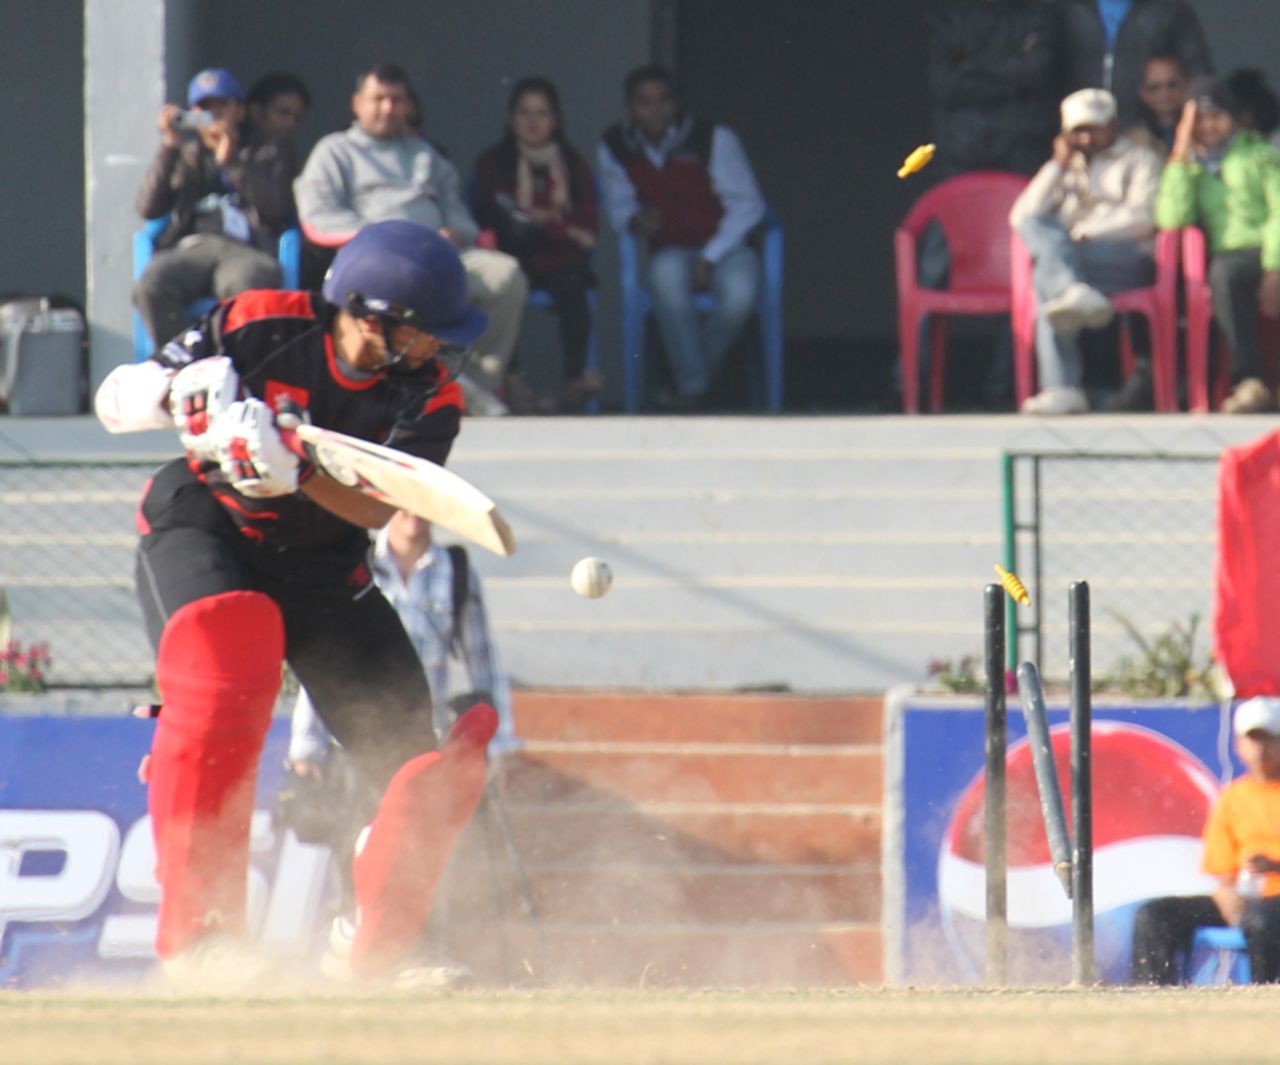 Kinchit Shah's debut innings for Hong Kong only lasted two balls in the ACC Twenty20 Cup 2011 final against Afghanistan in Kathmandu on 11th December 2011